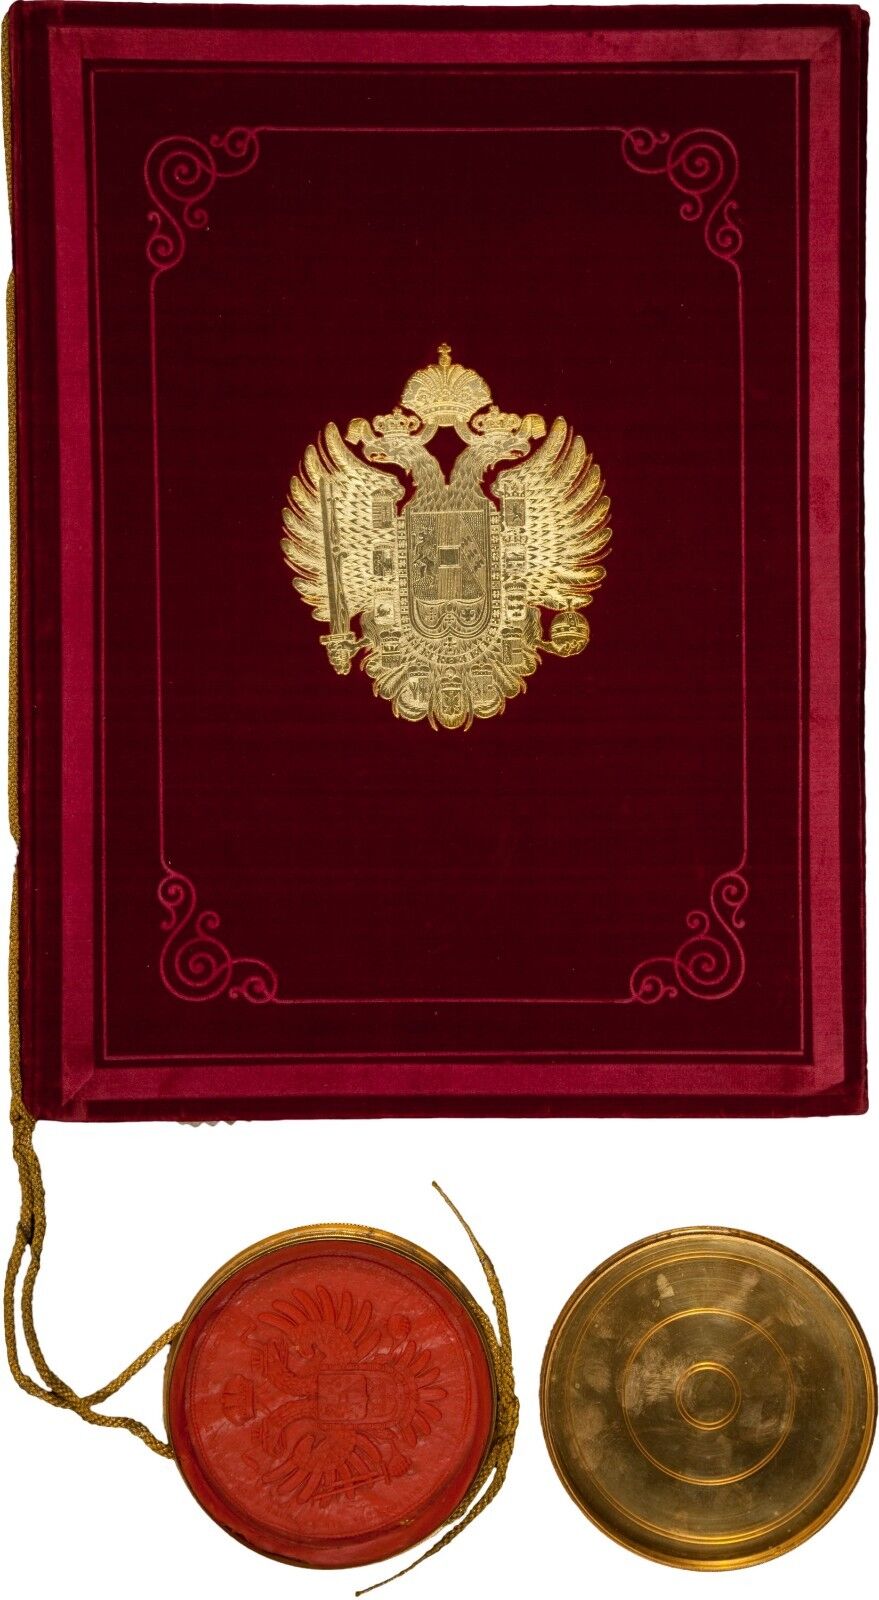 Emperor Franz Joseph: Grant of Arms and Nobility Signed, Austro-Hungarian Empire